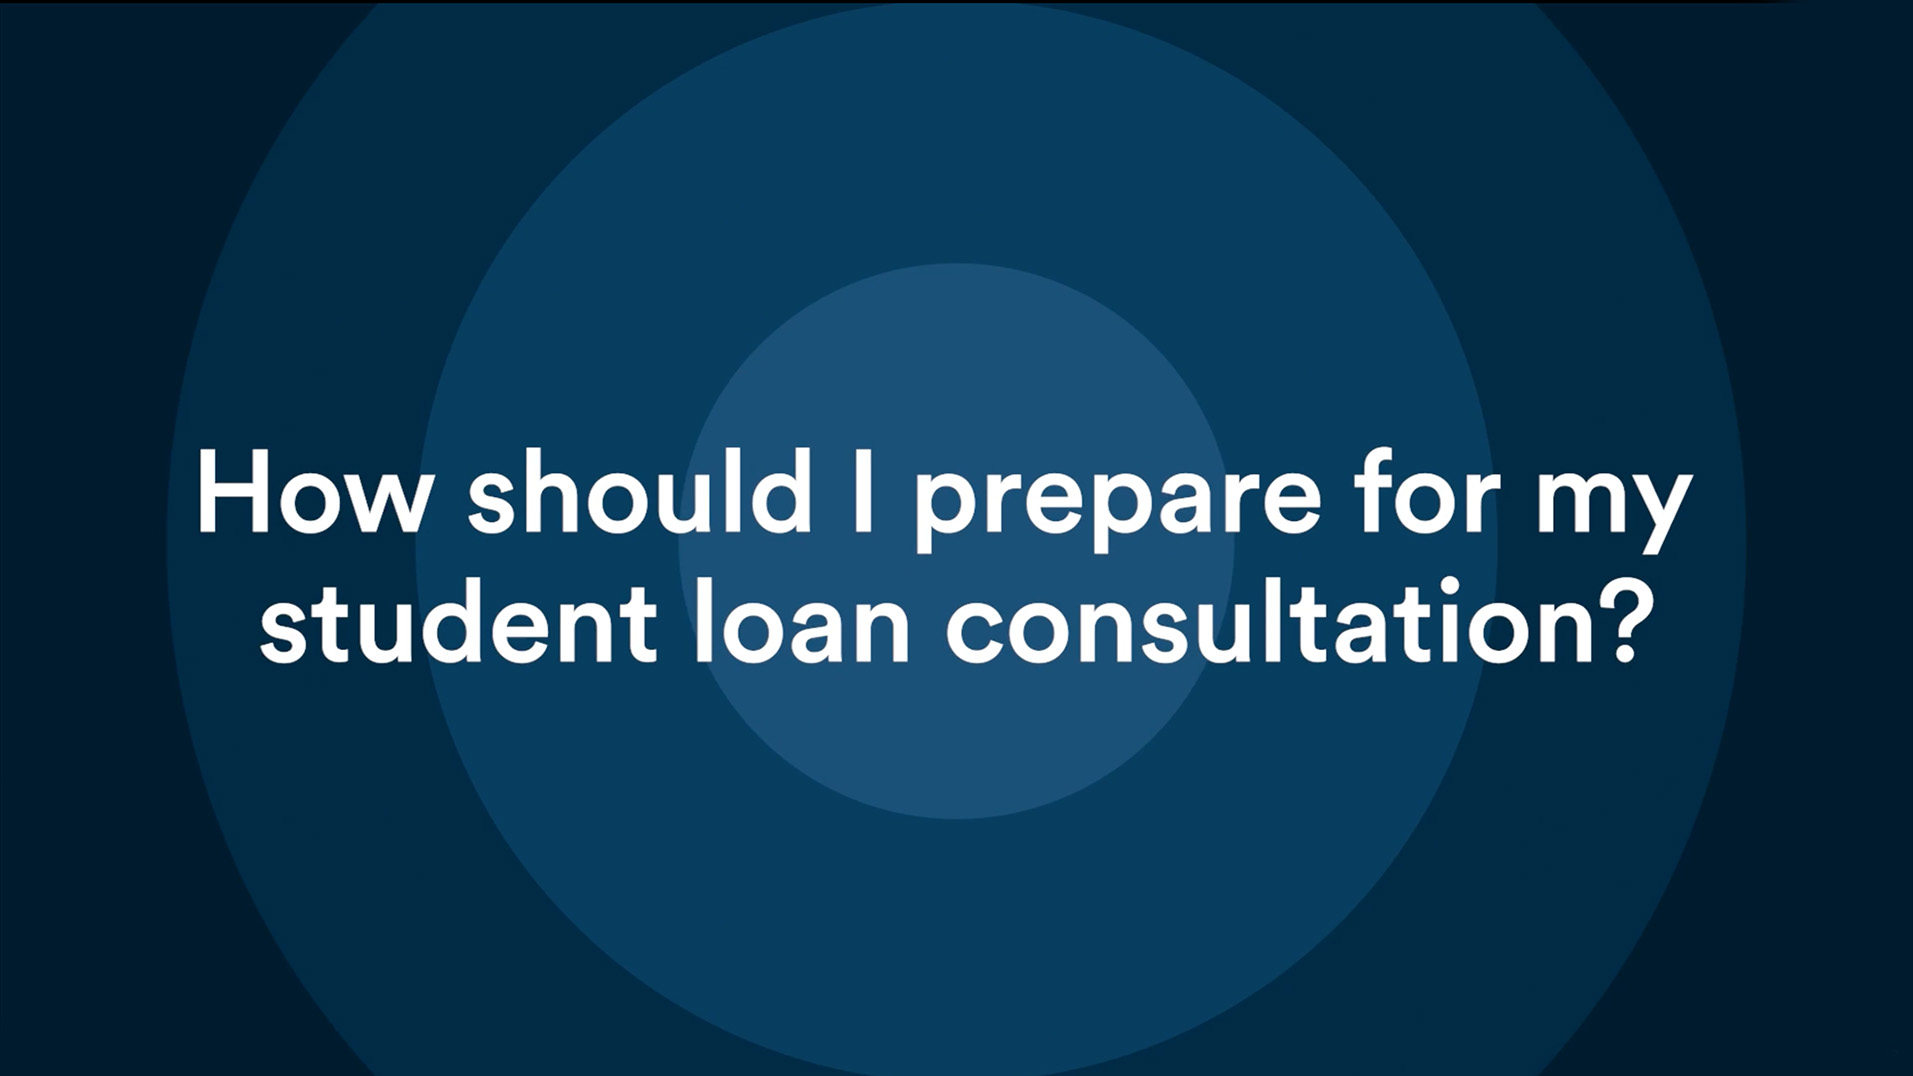 How to Prepare for Student Loan Consultation